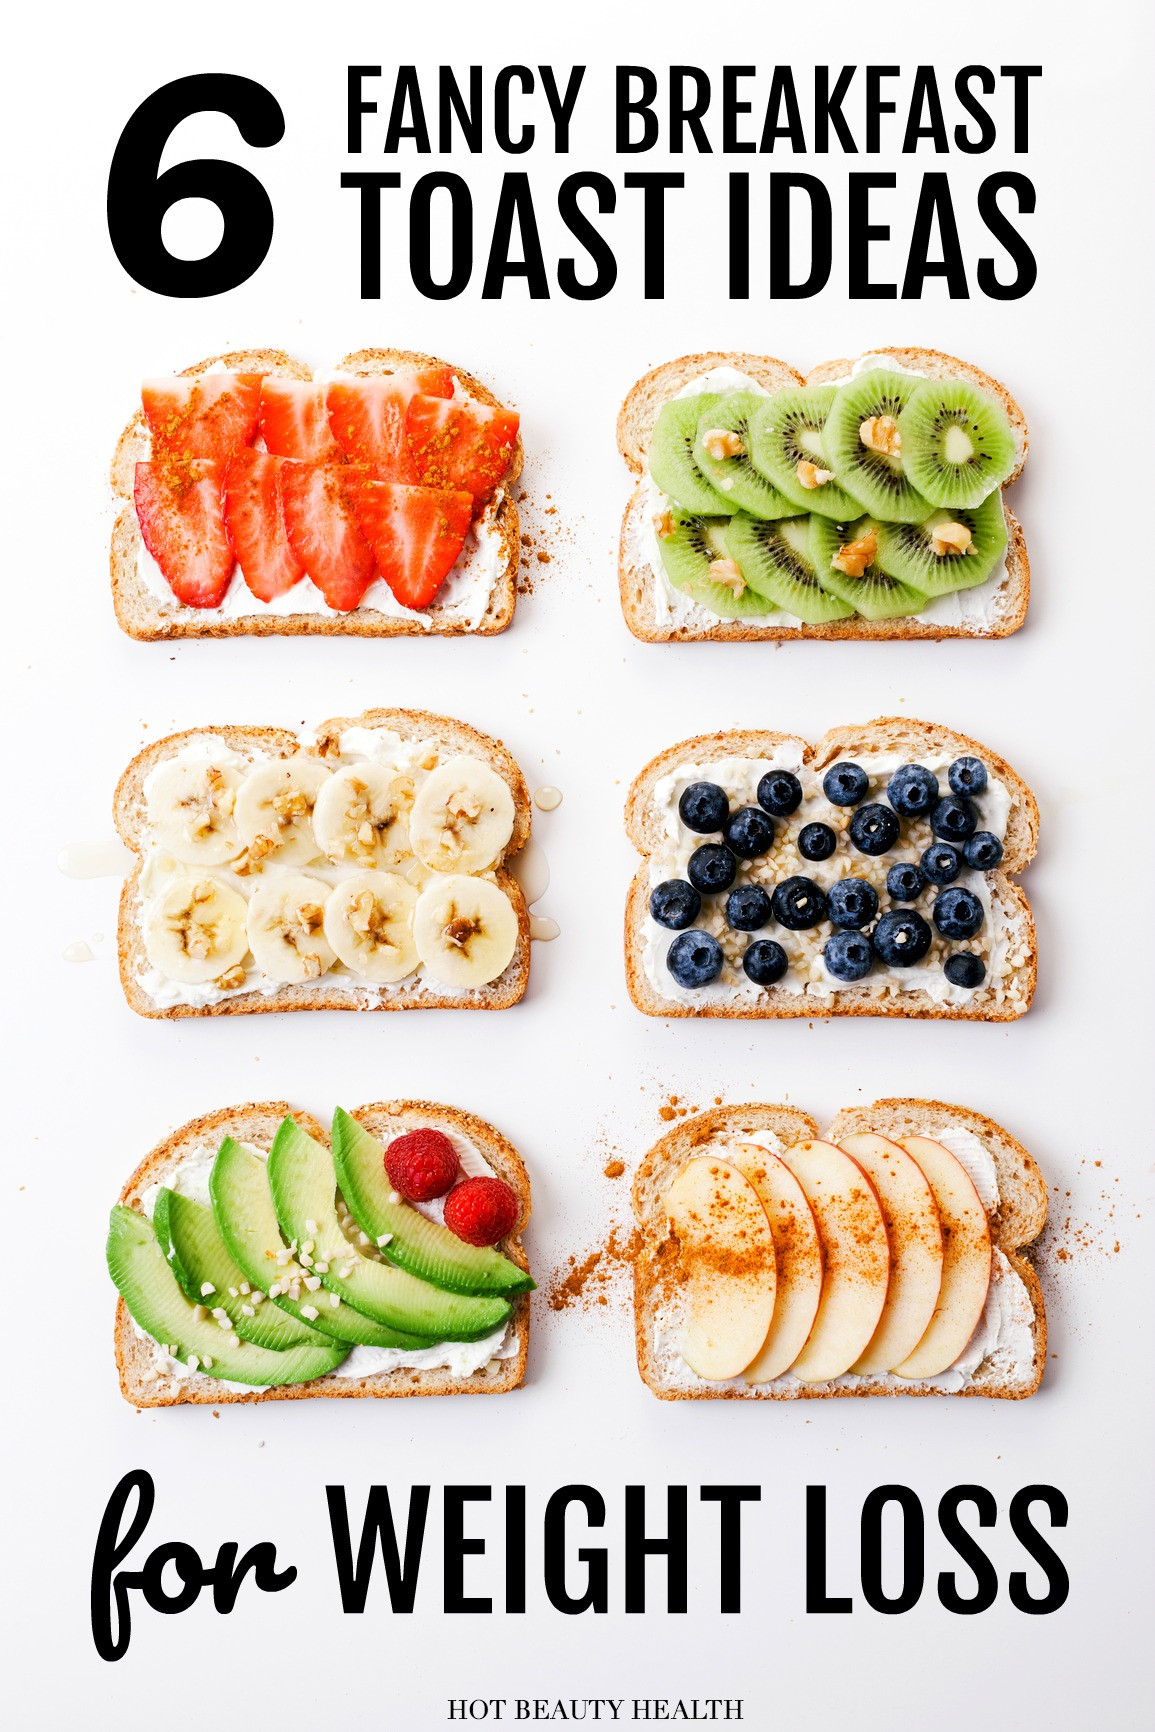 Healthy Breakfast Ideas For Weight Loss
 6 Easy & Creative Ways to Fancy Up Breakfast Toasts Hot